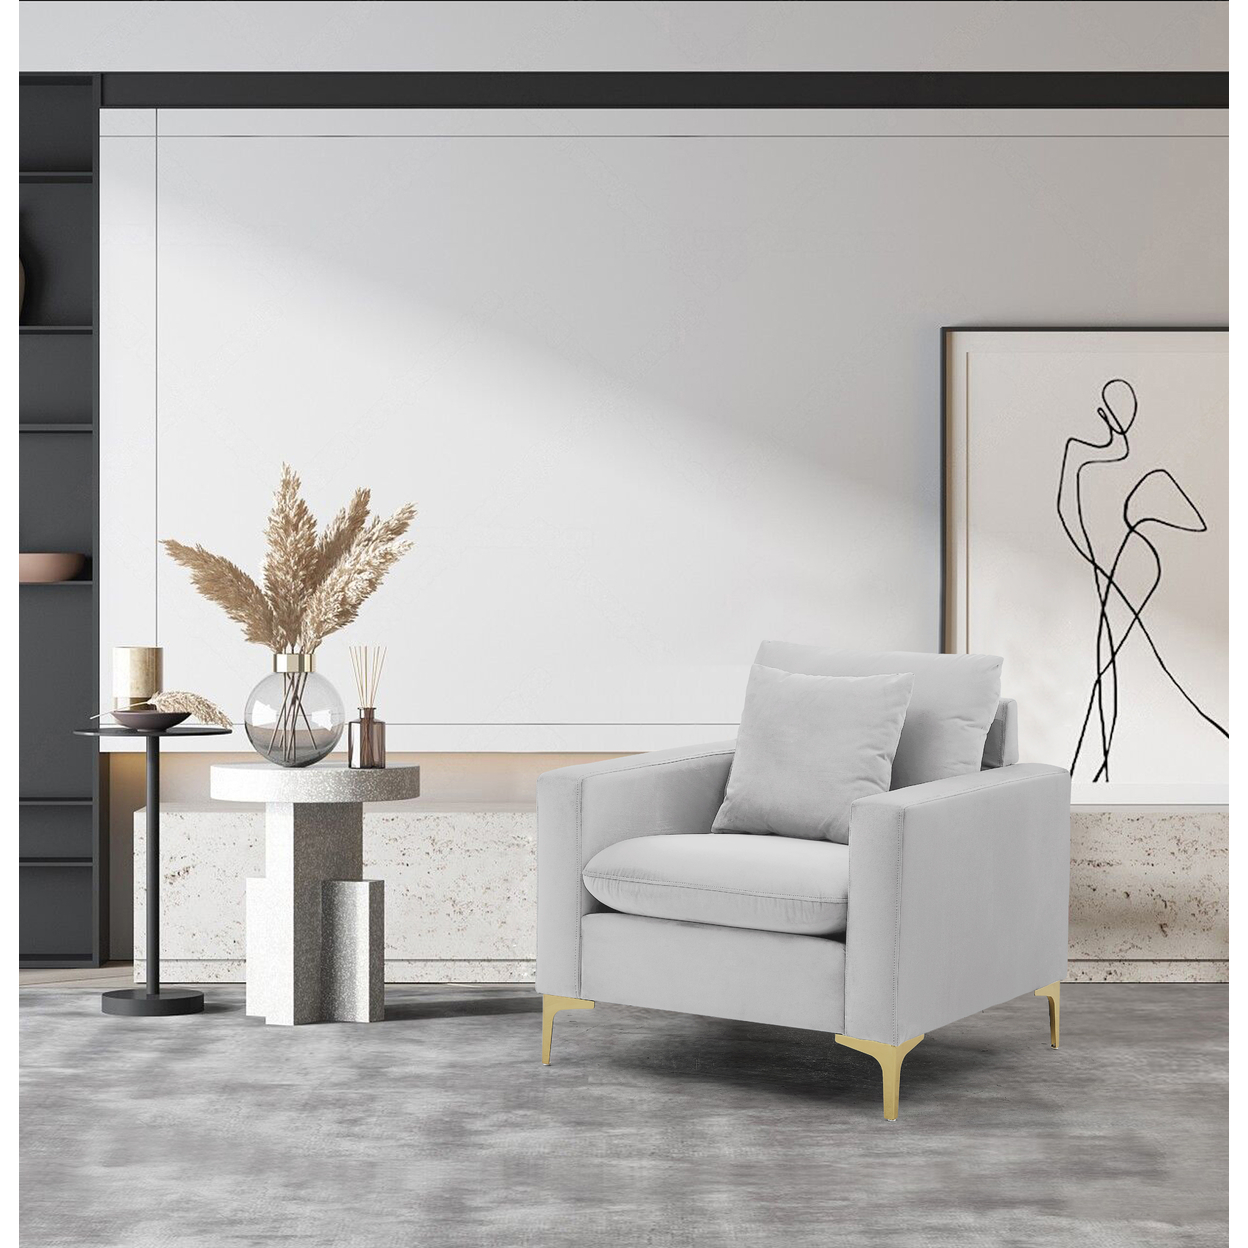 Iconic Home Roxi Club Chair Velvet Upholstered Loose Back Design Gold Tone Metal Y-Legs With Decorative Pillow - Silver